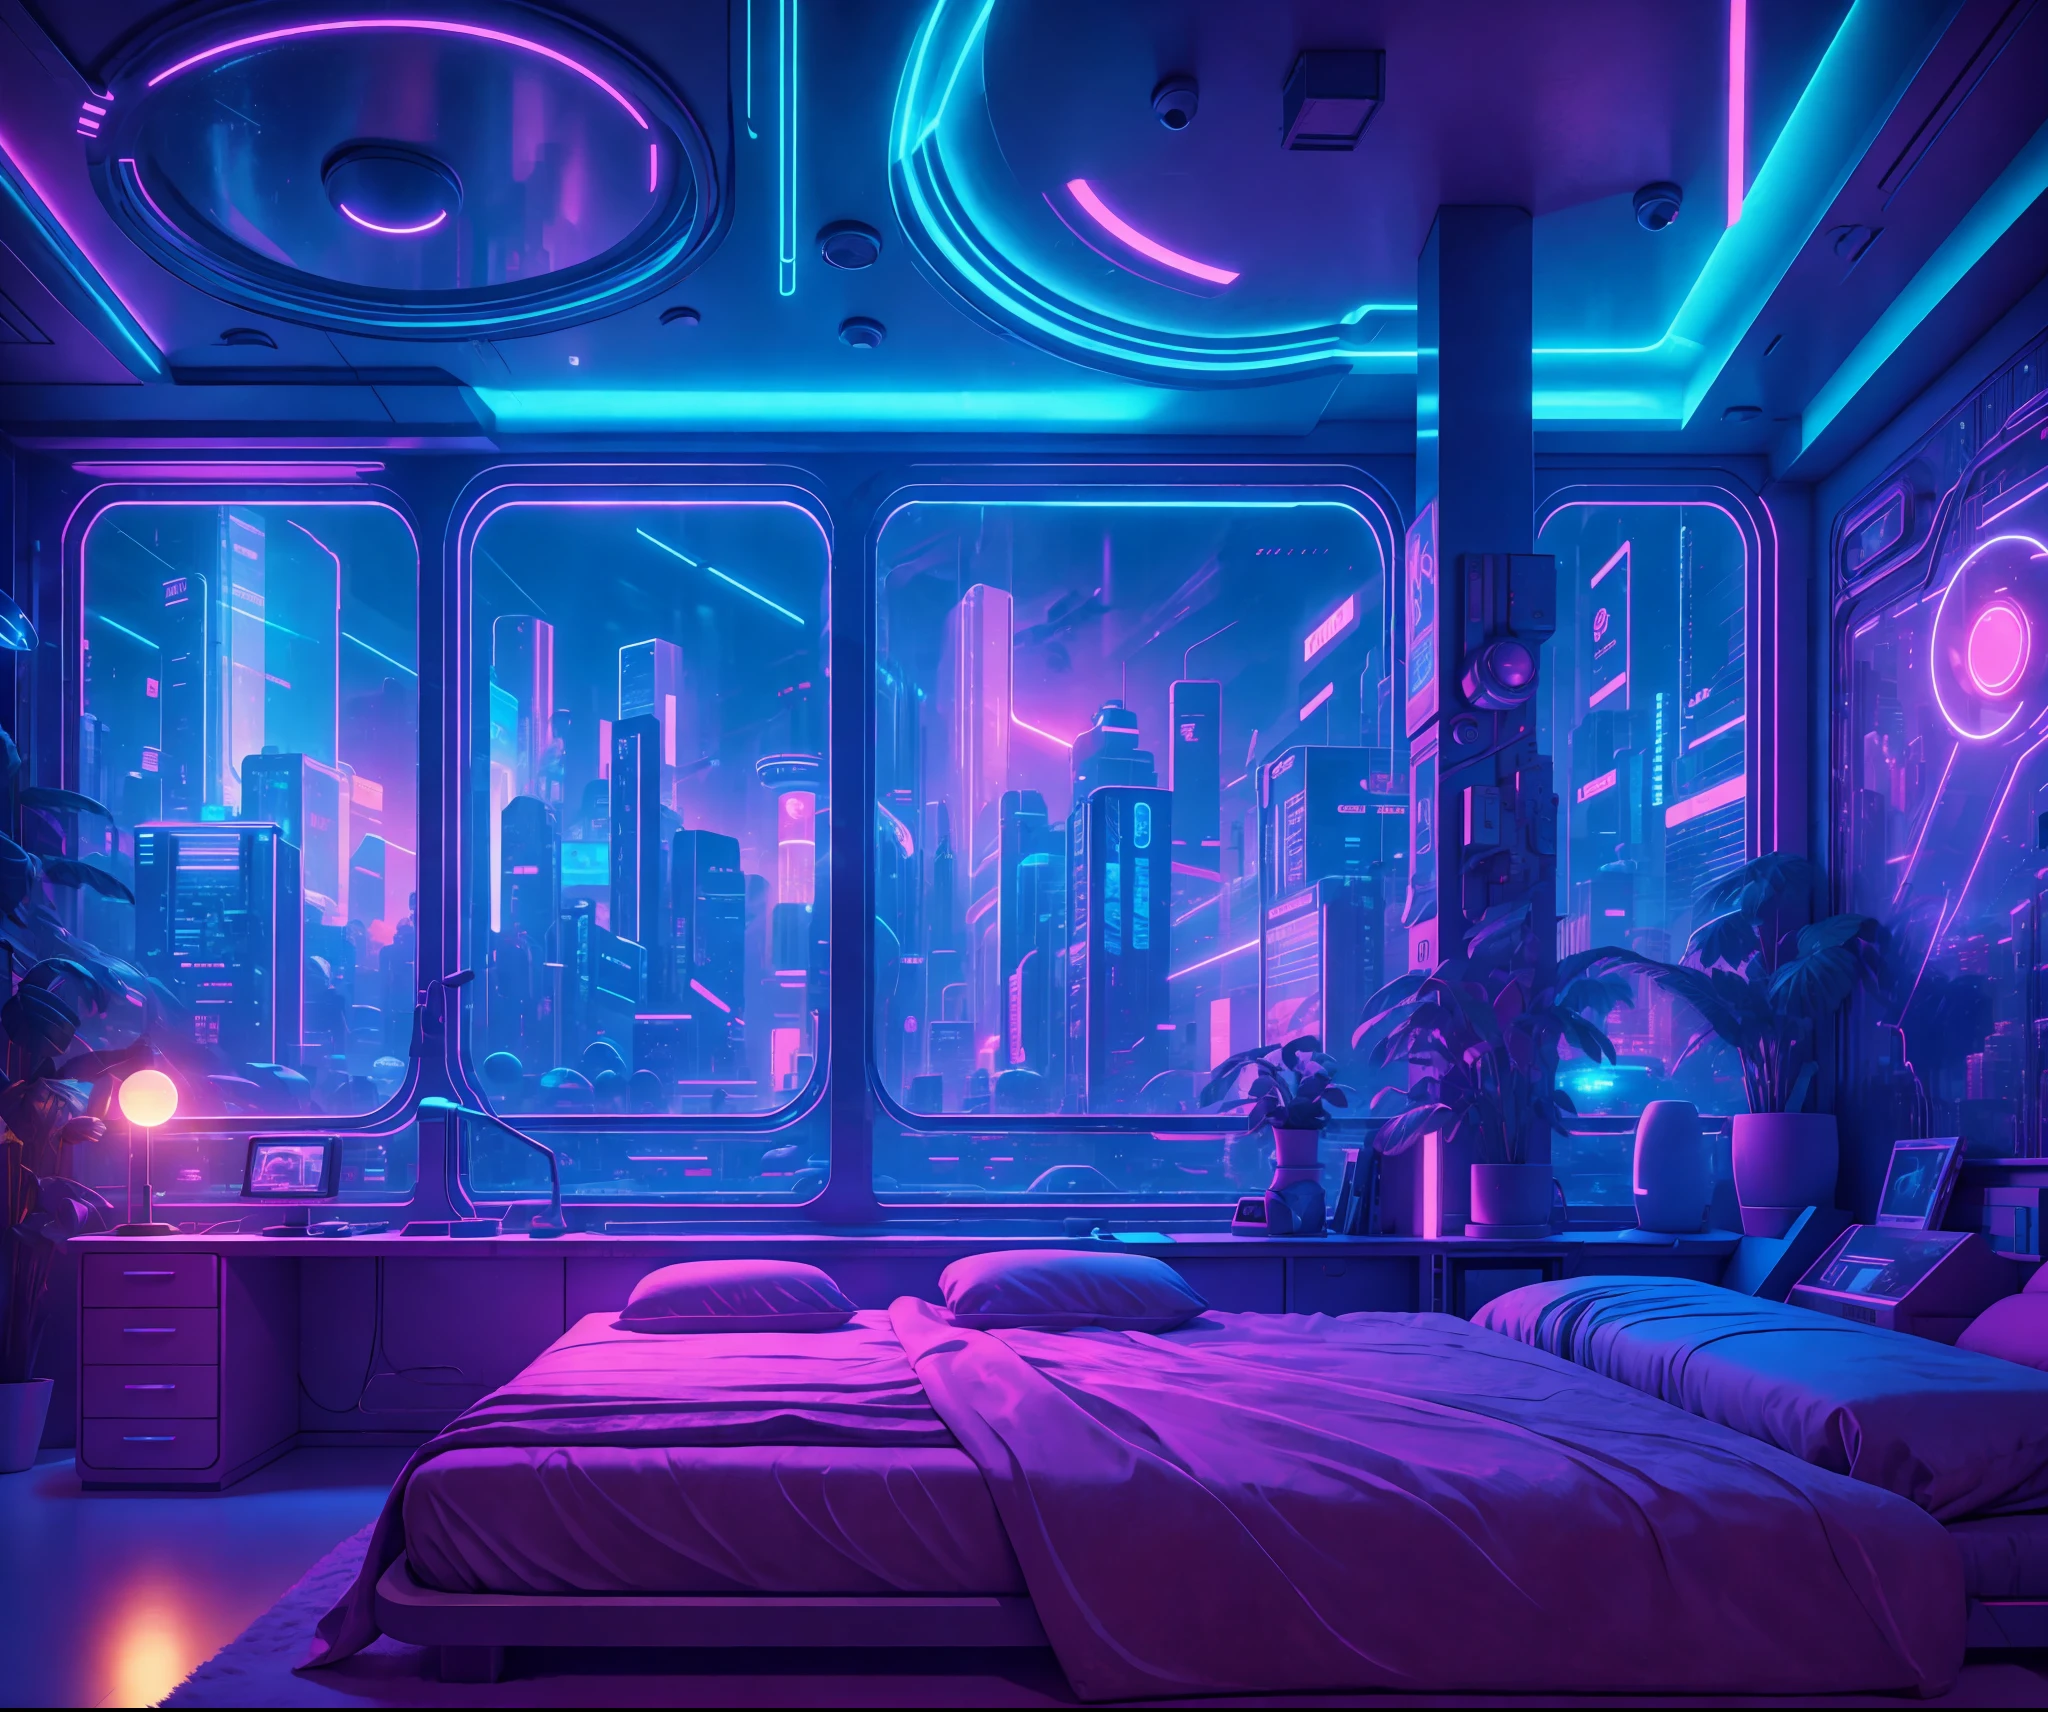 ((masterpiece)), (ultra-detailed), (intricate details), (high resolution CGI artwork 8k), Create an image of a small retro-futuristic and realistic vaporwave cyberpunk (bedroom) at night time. One of the walls should feature a big window with a busy, colorful, and detailed (cyberpunk 2077), neon cityscape. The city should have a unique futuristic style with lots of colors, neon lights, signs, and differently-sized buildings. The cityscape should be extremely detailed with depth of field. The city should have a lot of unique visual interest with many small details. Utilize atmospheric and ambient lighting to create depth and evoke the feel of a busy futuristic city outside the window. Pay close attention to details like intricate, hires eyes and 90s bedroom accents. Camera: wide shot showing the bed or desk and the window. The window should be the focal point of the image. Lighting: use atmospheric and volumetric lighting to enhance the cityscape details. The room should be illuminated by the neon lights from the cityscape.